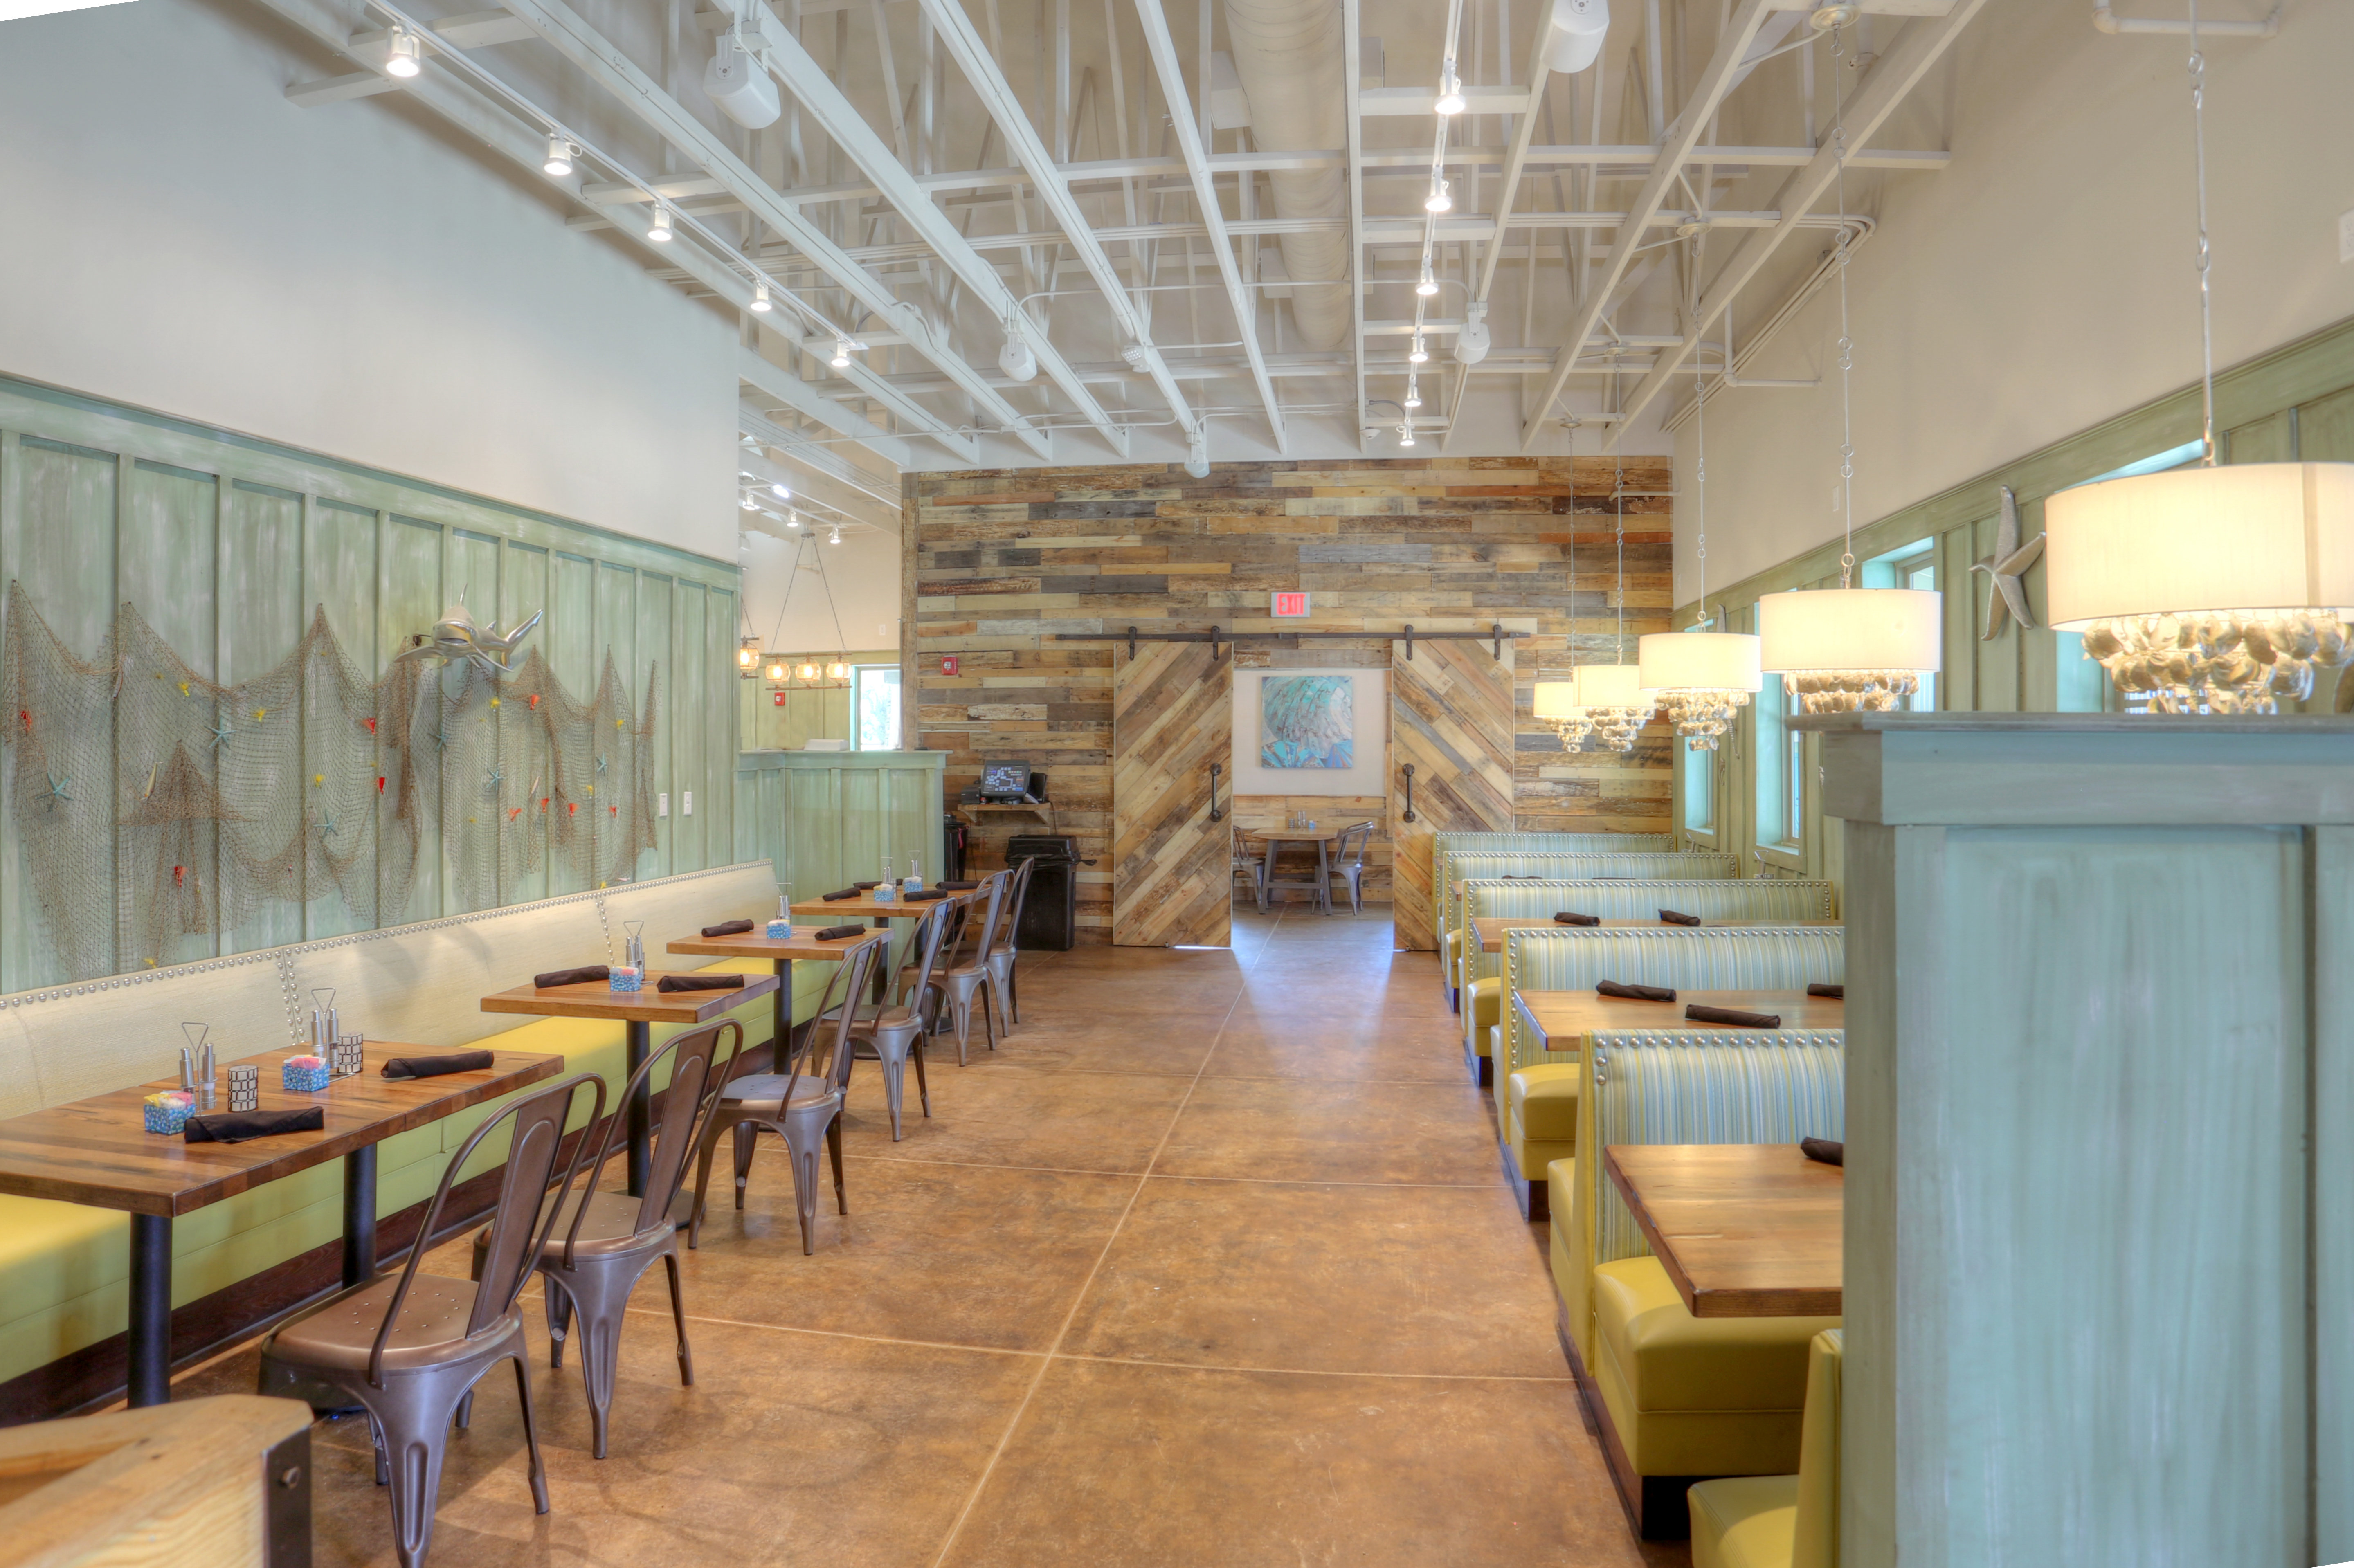 Beach House features seafood, sandwiches, salads and burgers